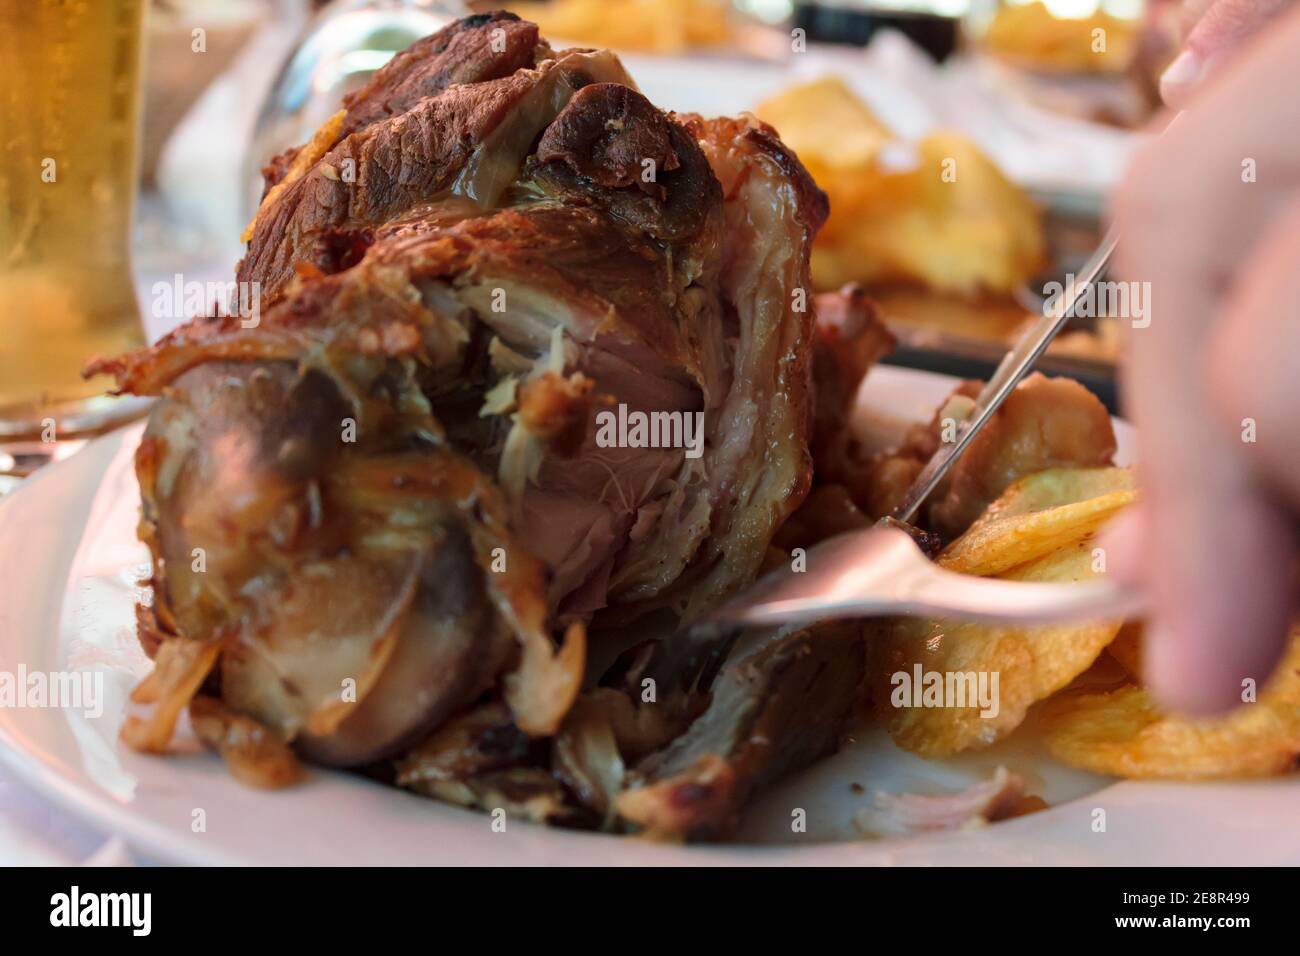 Eating roasted pork knuckle with french fries Stock Photo